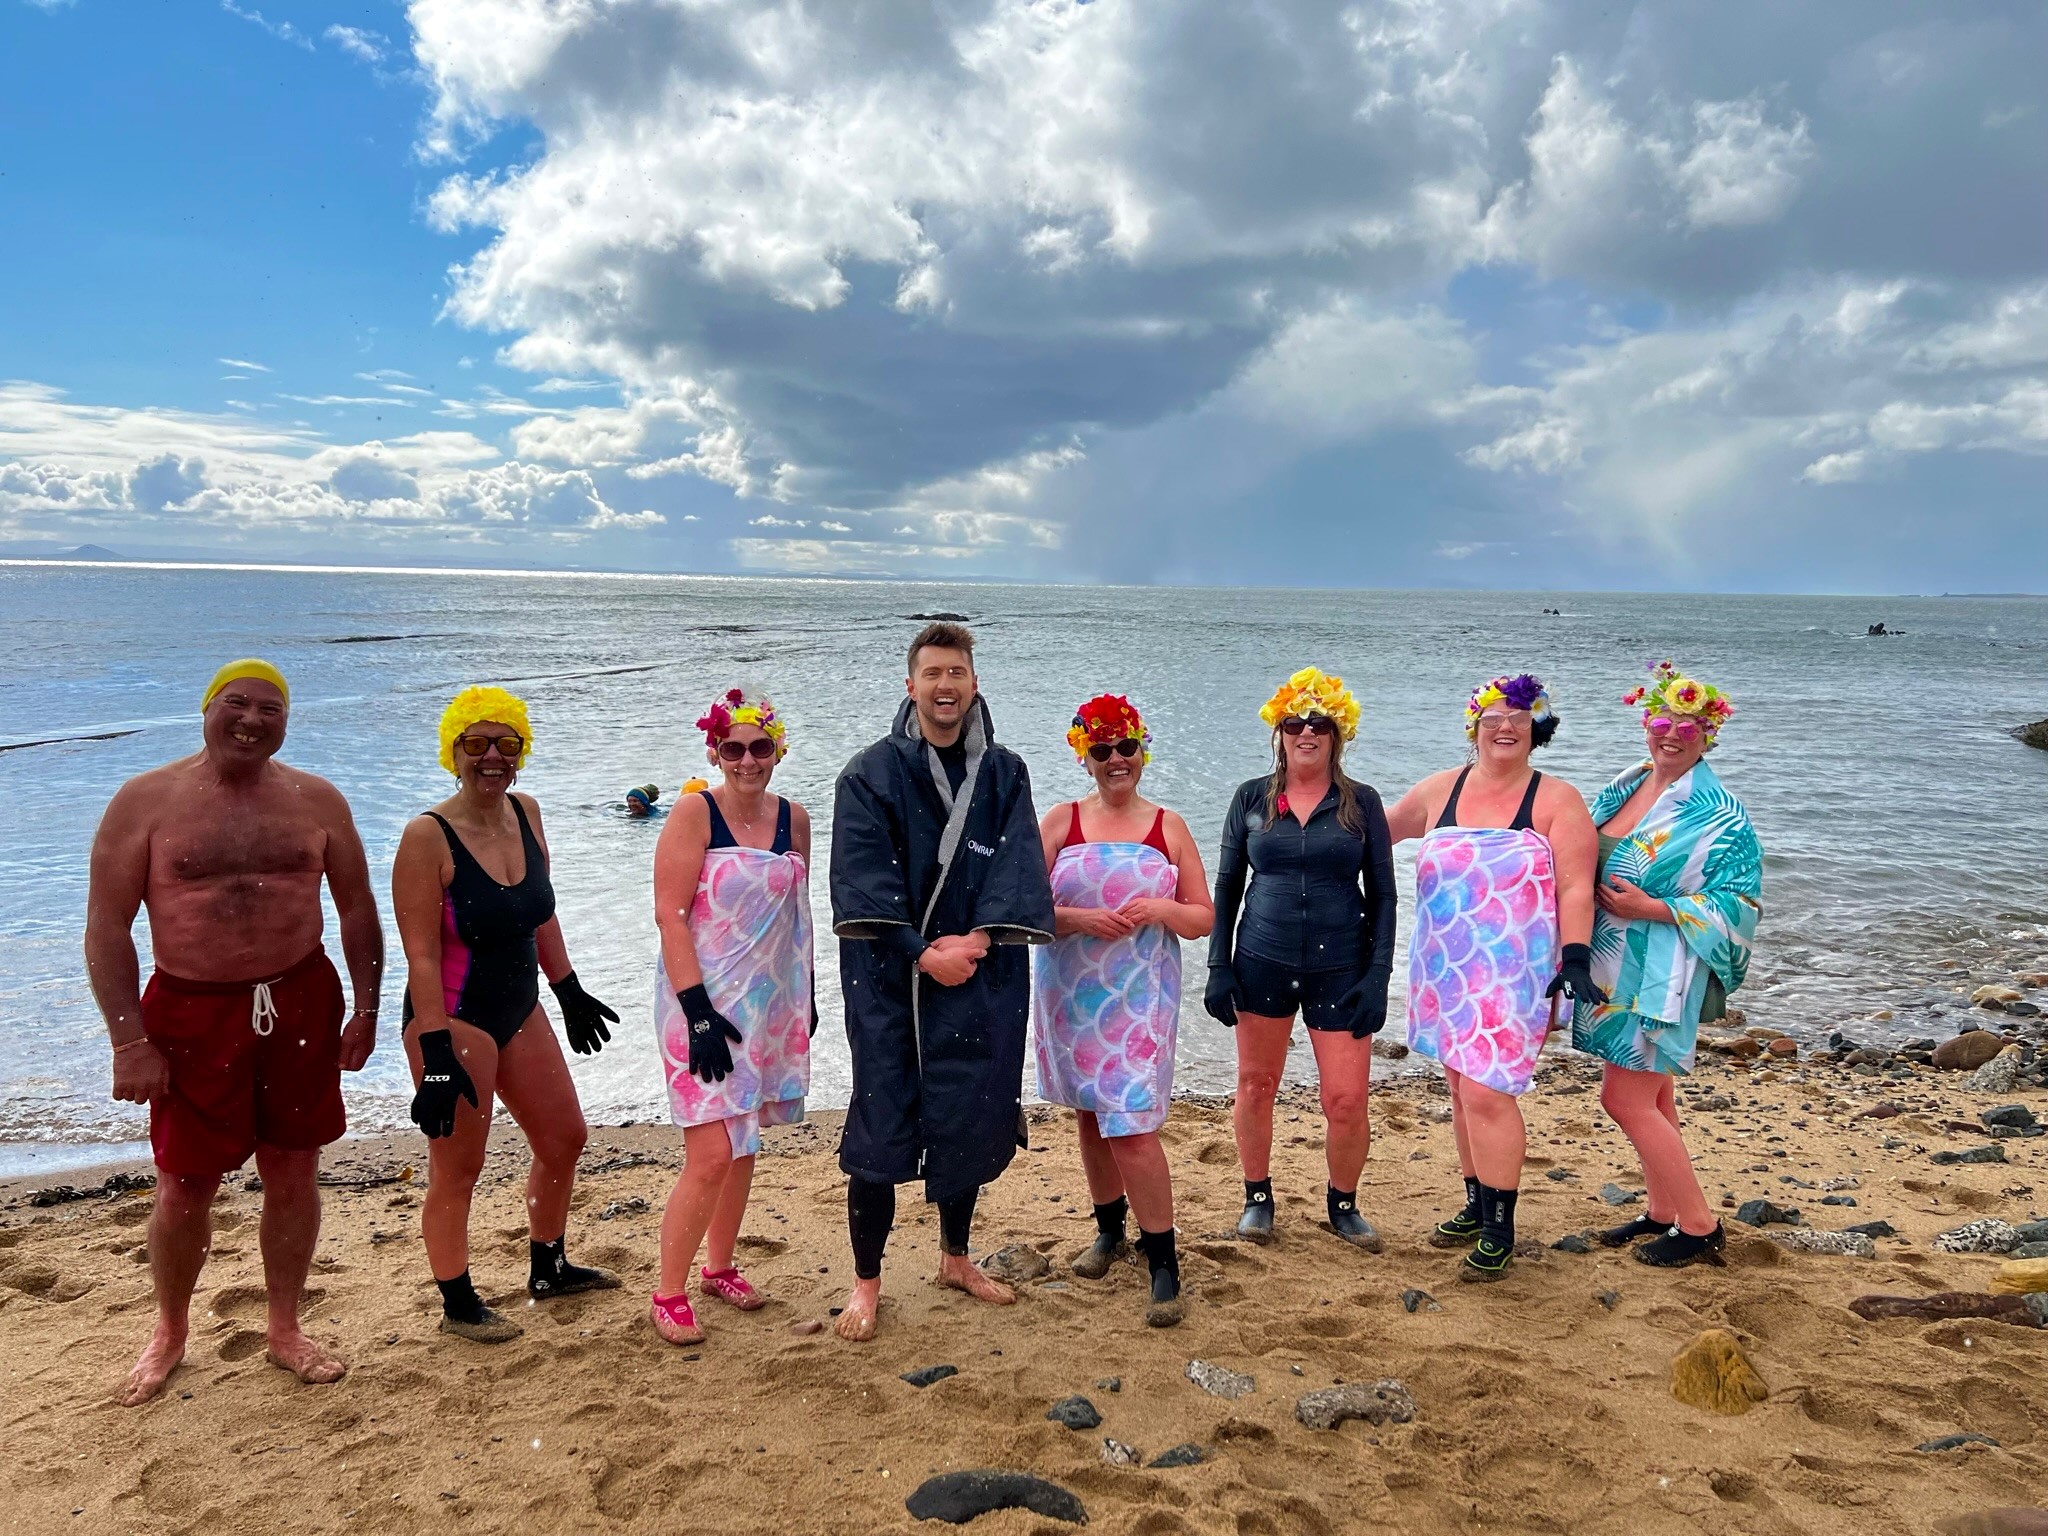 The Pittenweem 'menopausal mermaids' swimming group was a highlight of Sean's journey. 